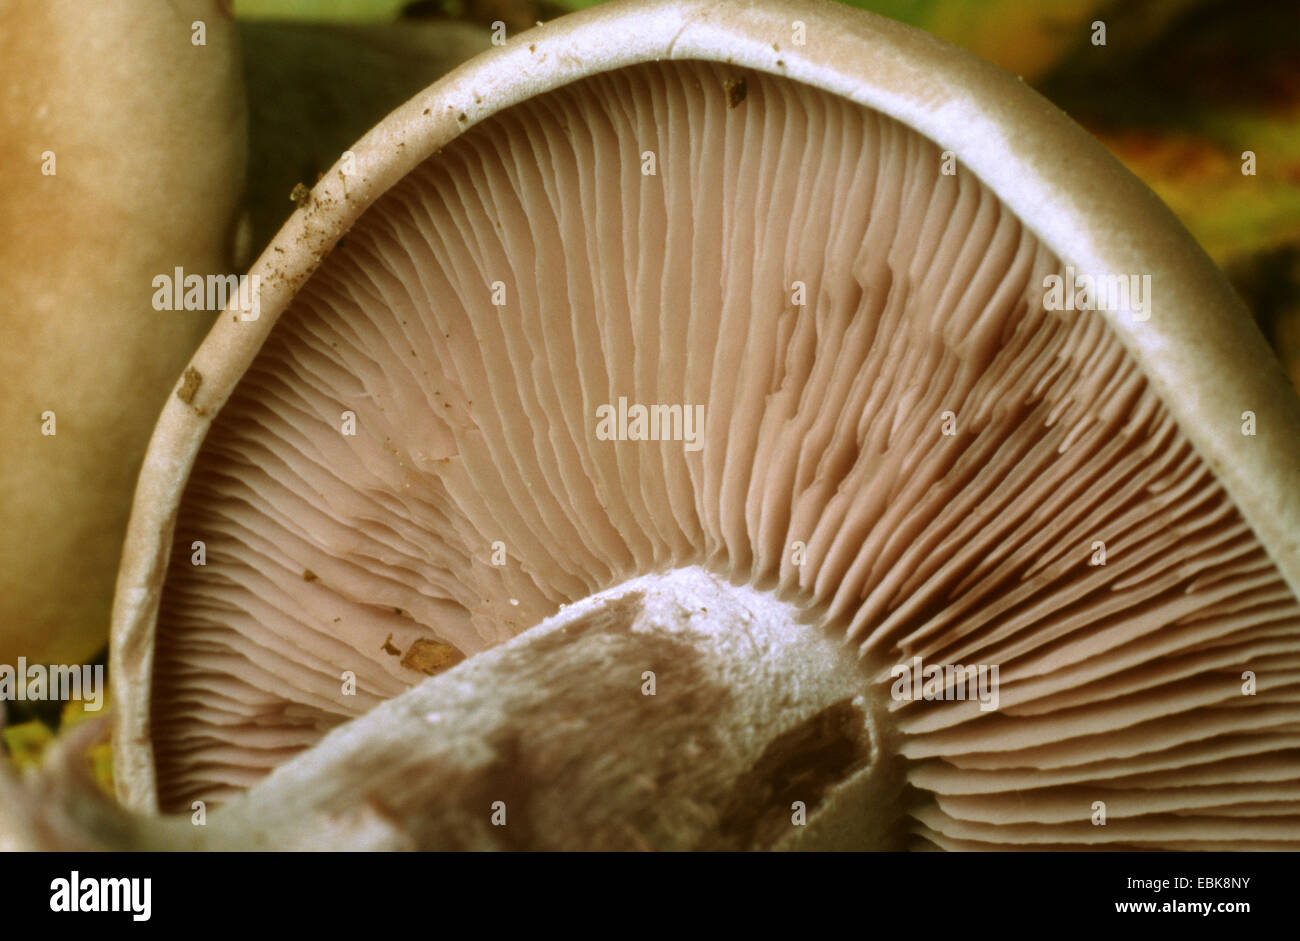 wood blewit (Lepista nuda), underside of a hat with gills, Germany Stock Photo